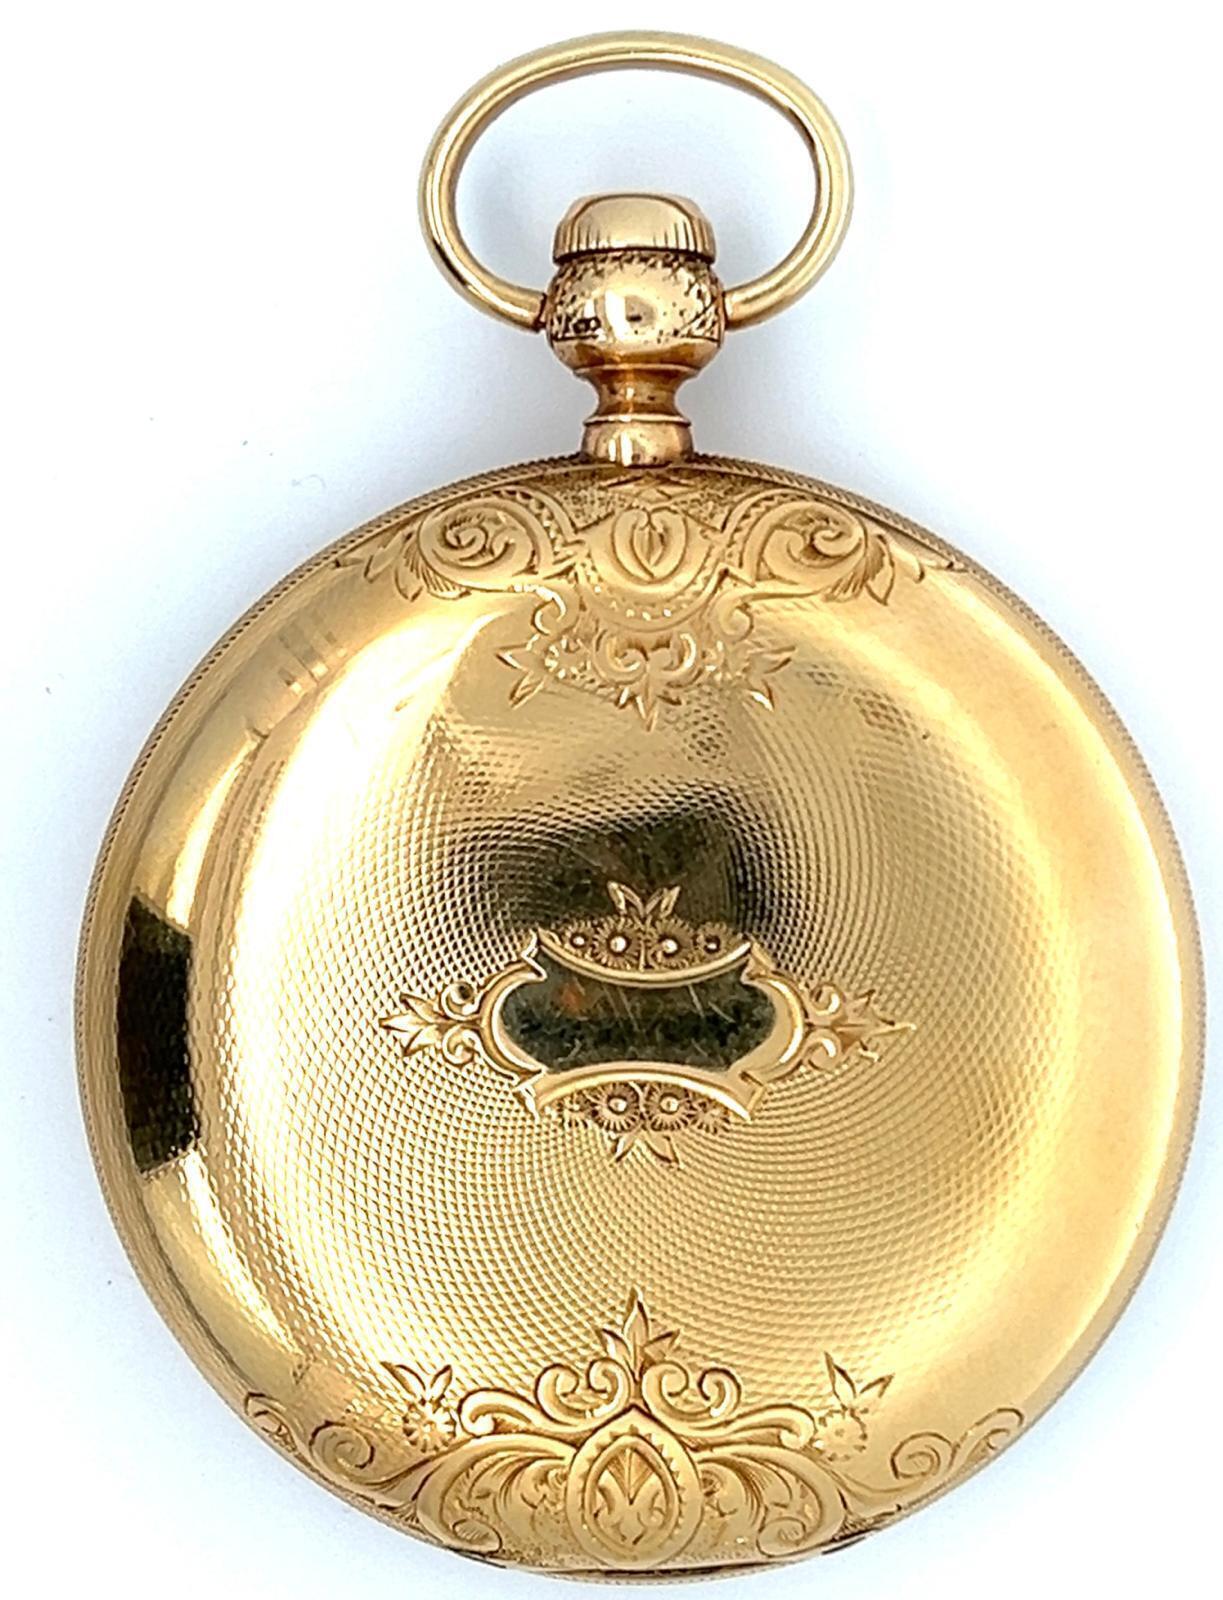 E. HOWARD AND CO. N SIZE SERIES III 18K GOLD HUNTING CASE POCKET WATCH, CIRCA 1869